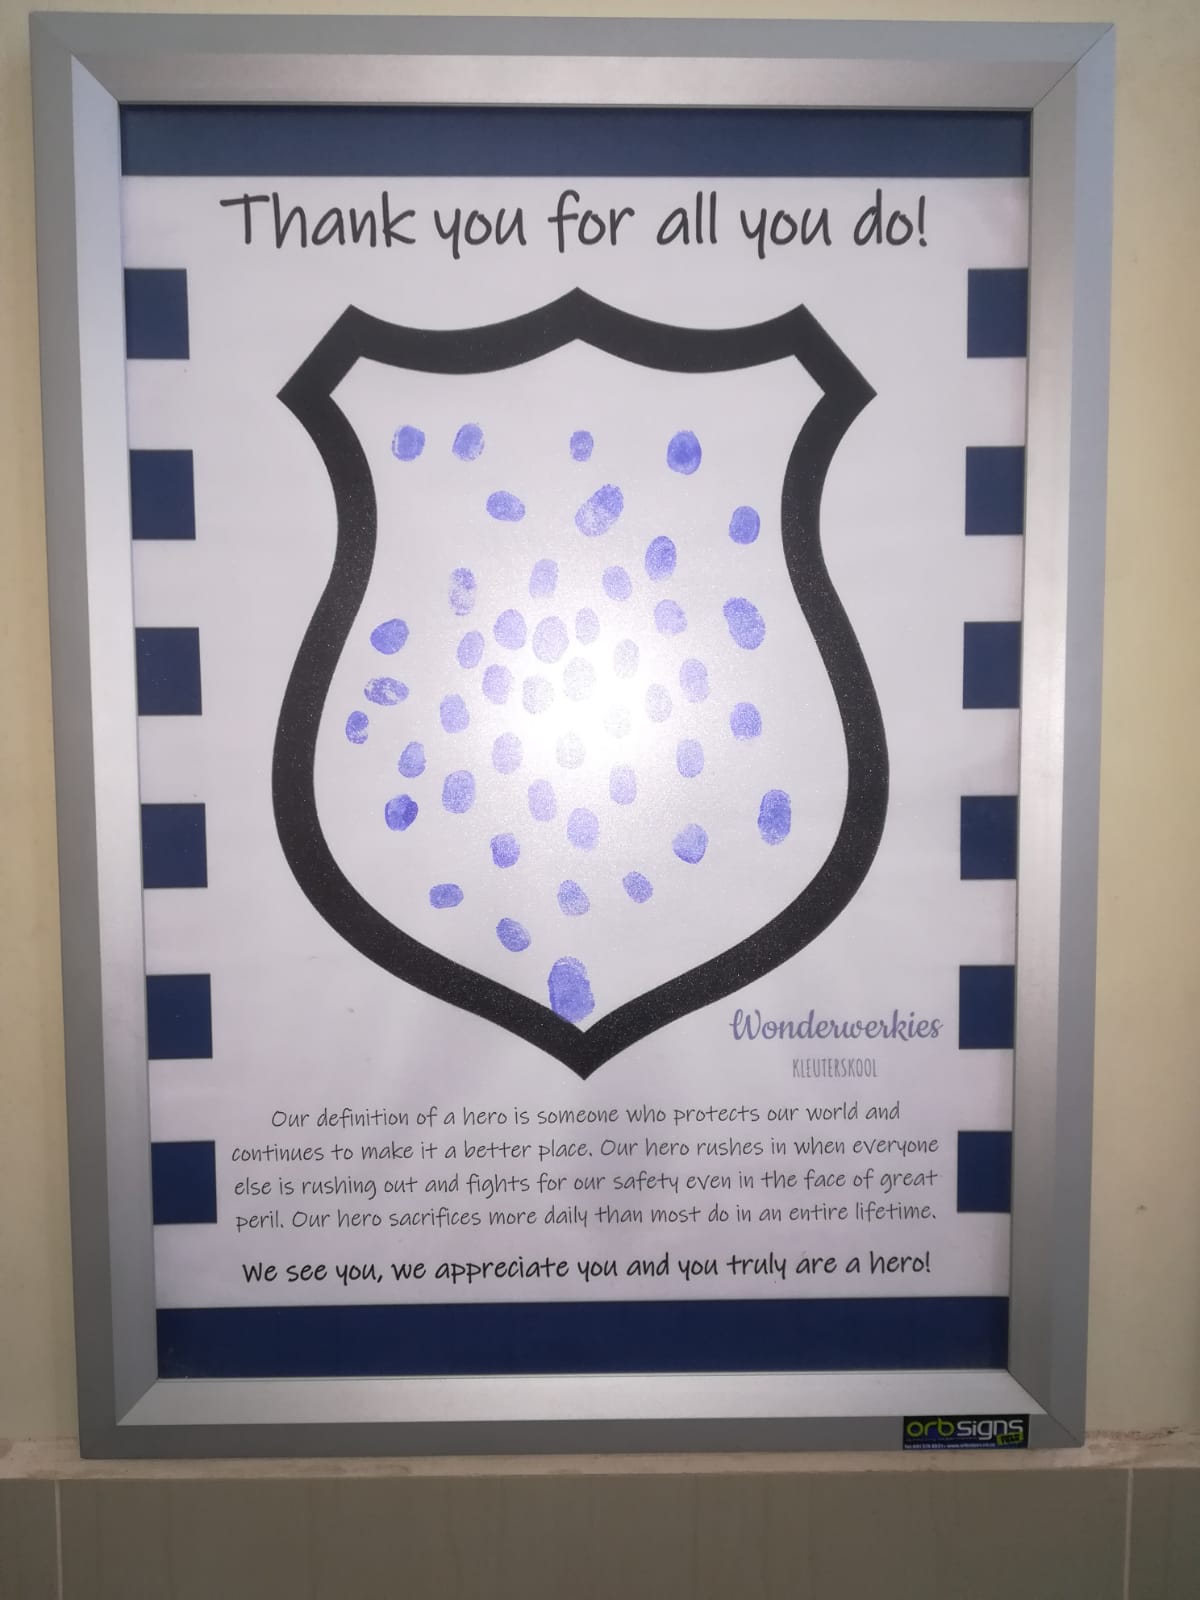 Appreciation poster presented to SAPS Mount Road by kids - Eastern Cape